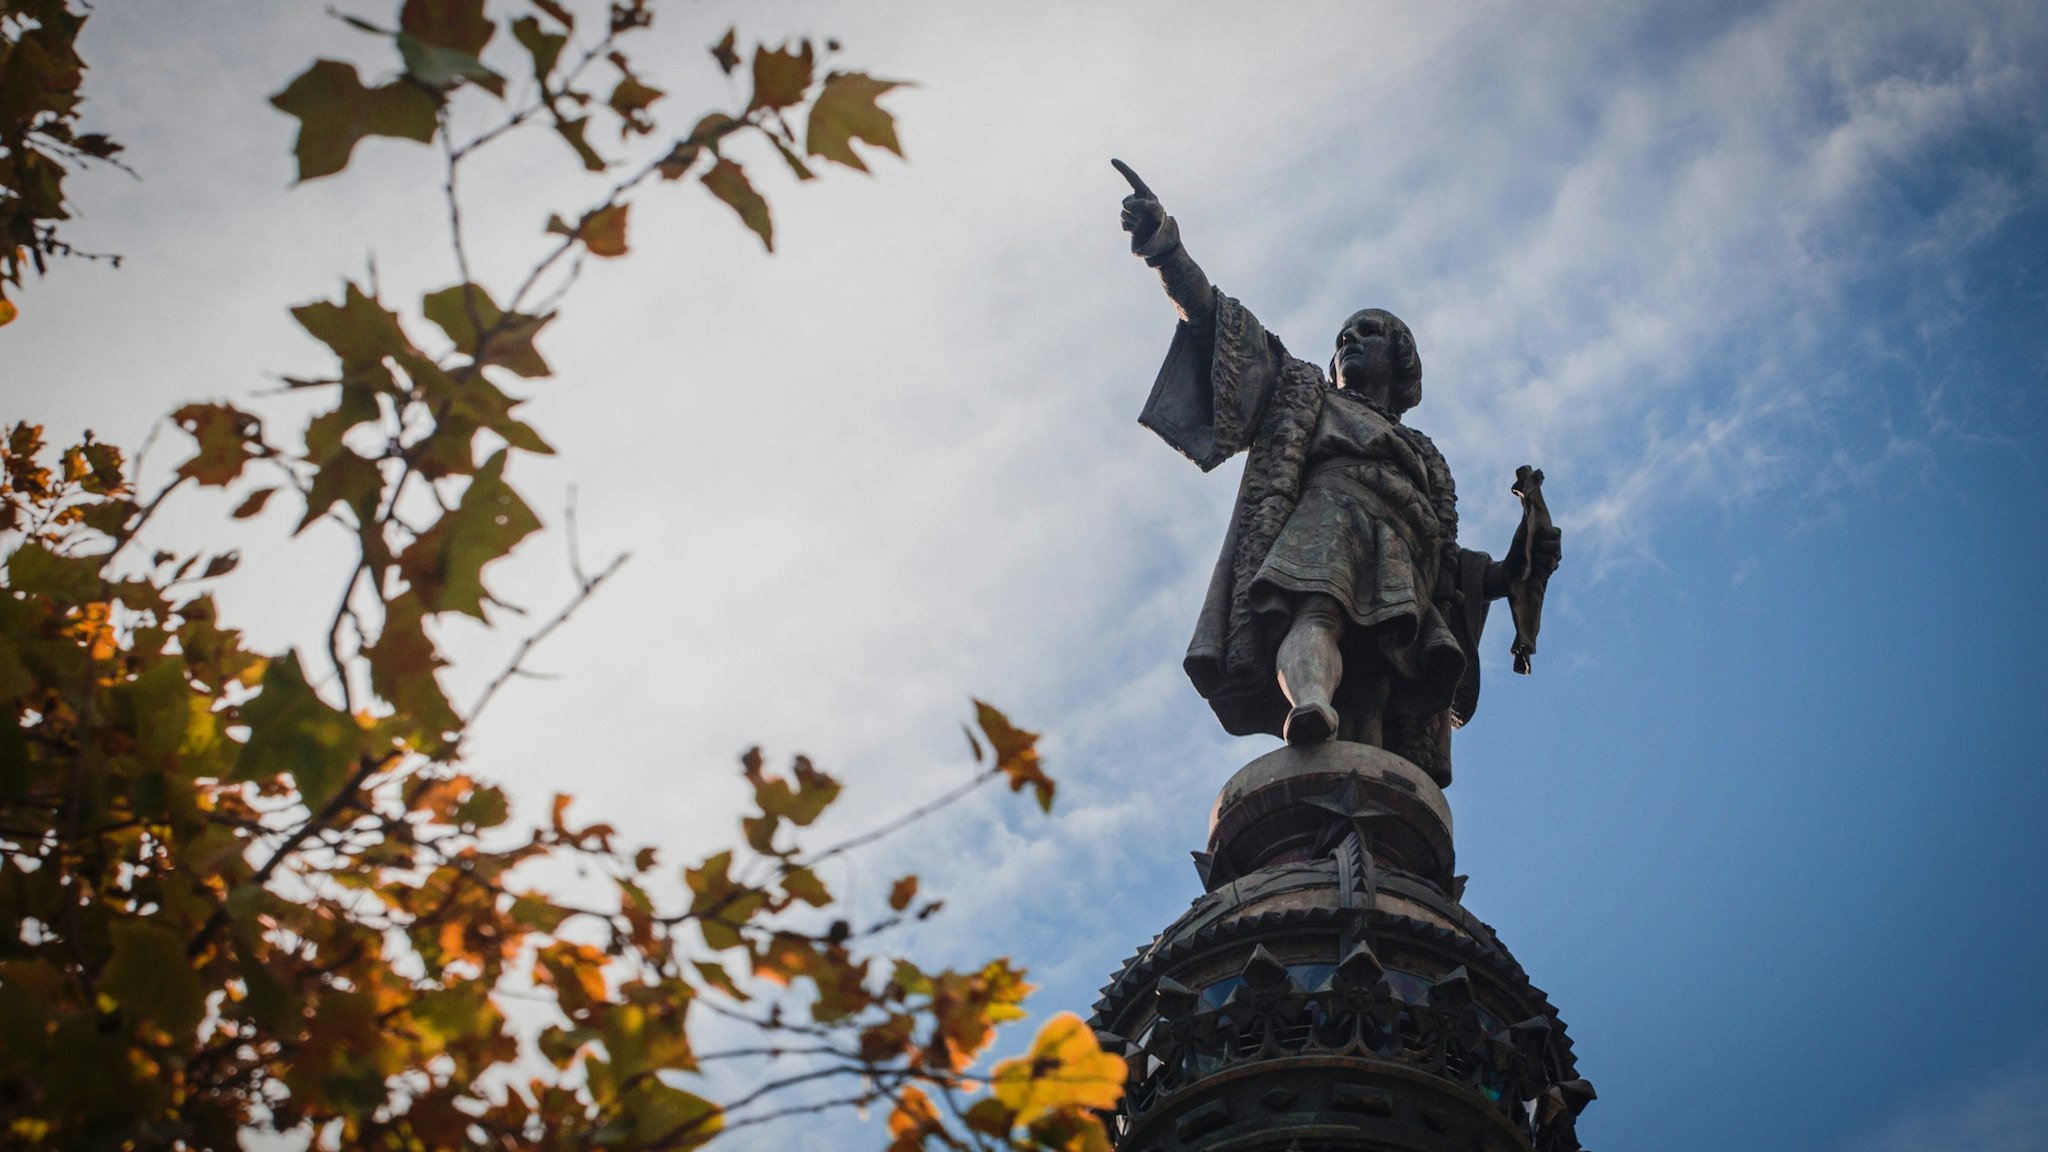 Monument Of Christopher Columbus Against Cloudy Sky - stock photo